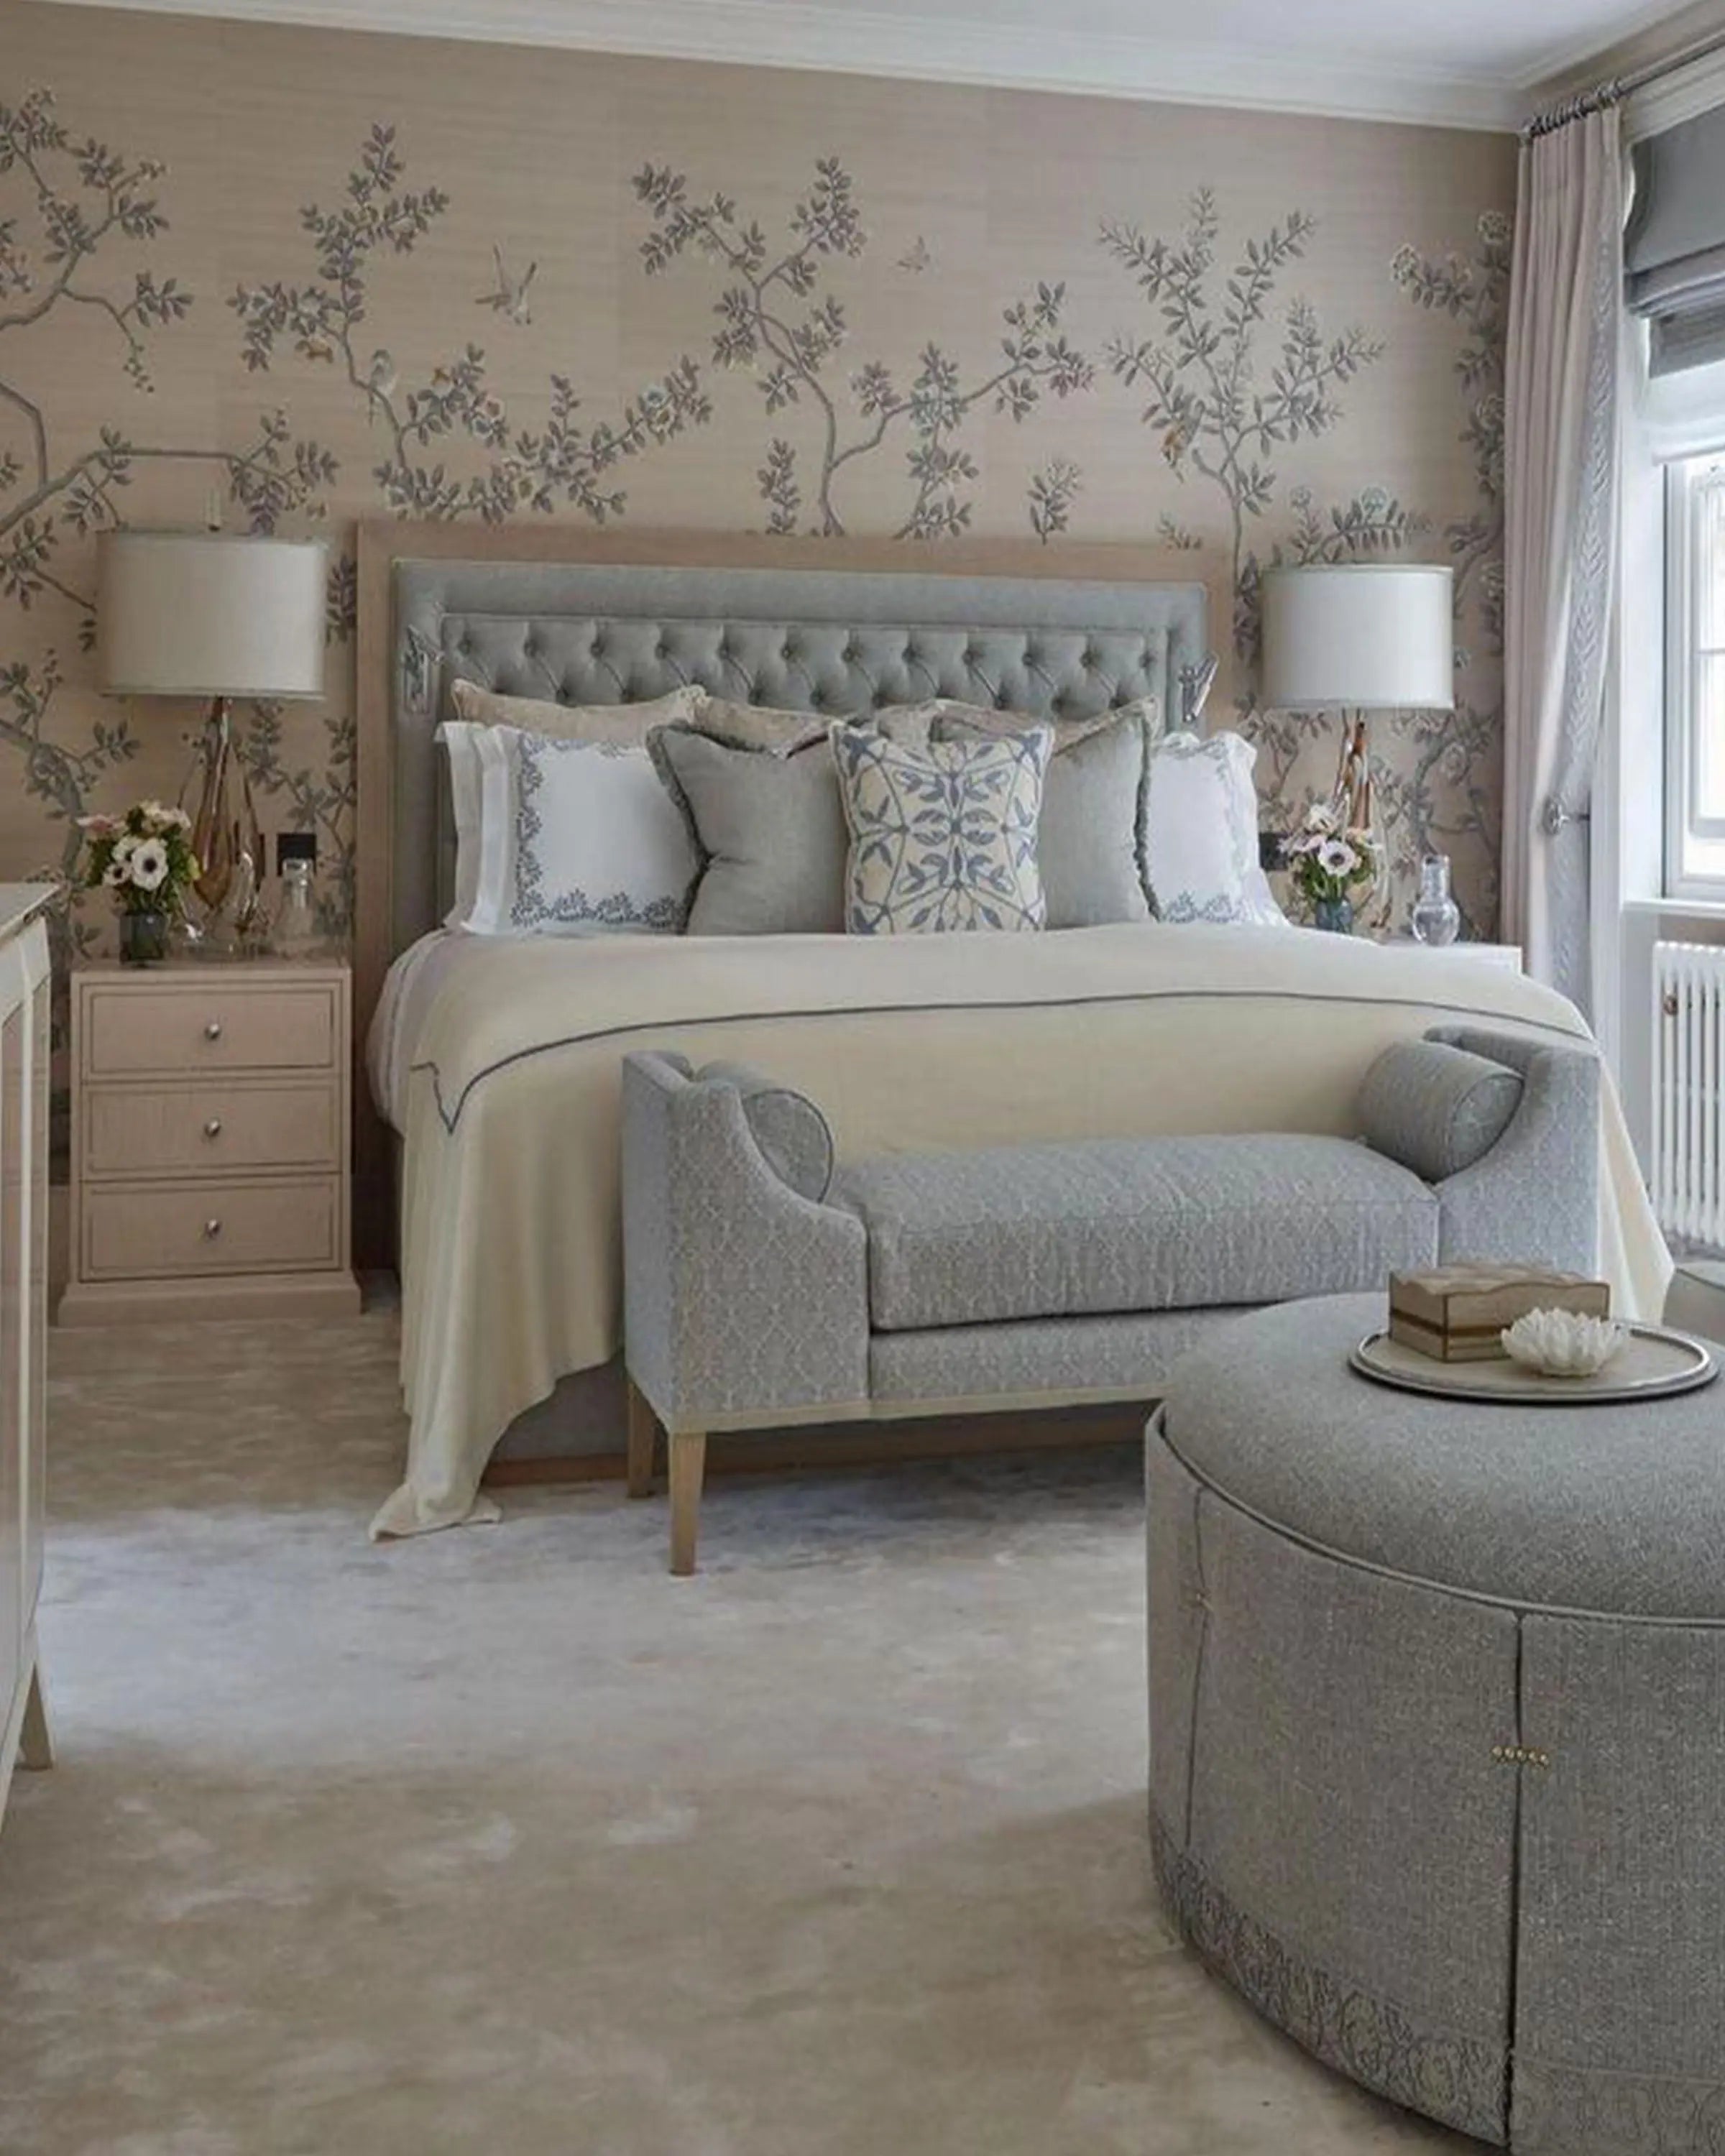 AMIA GREY & BROWN BED WITH HEADBOARD ANGIE HOMES